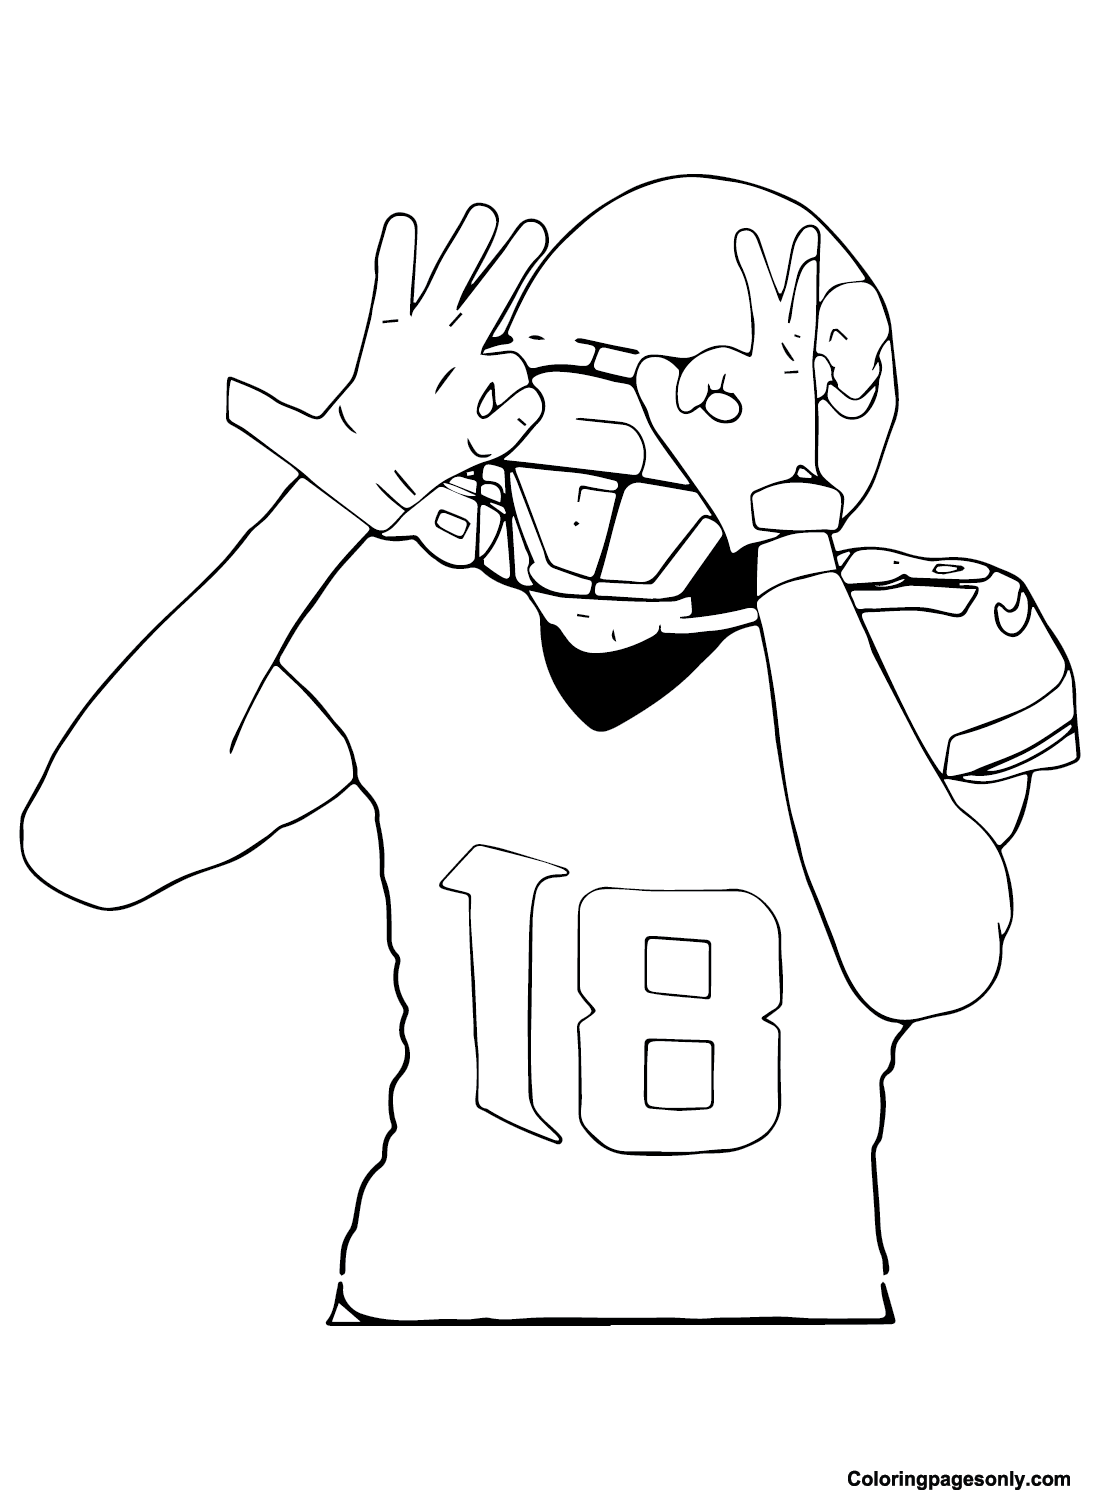 Justin Jefferson color Sheets Coloring Page